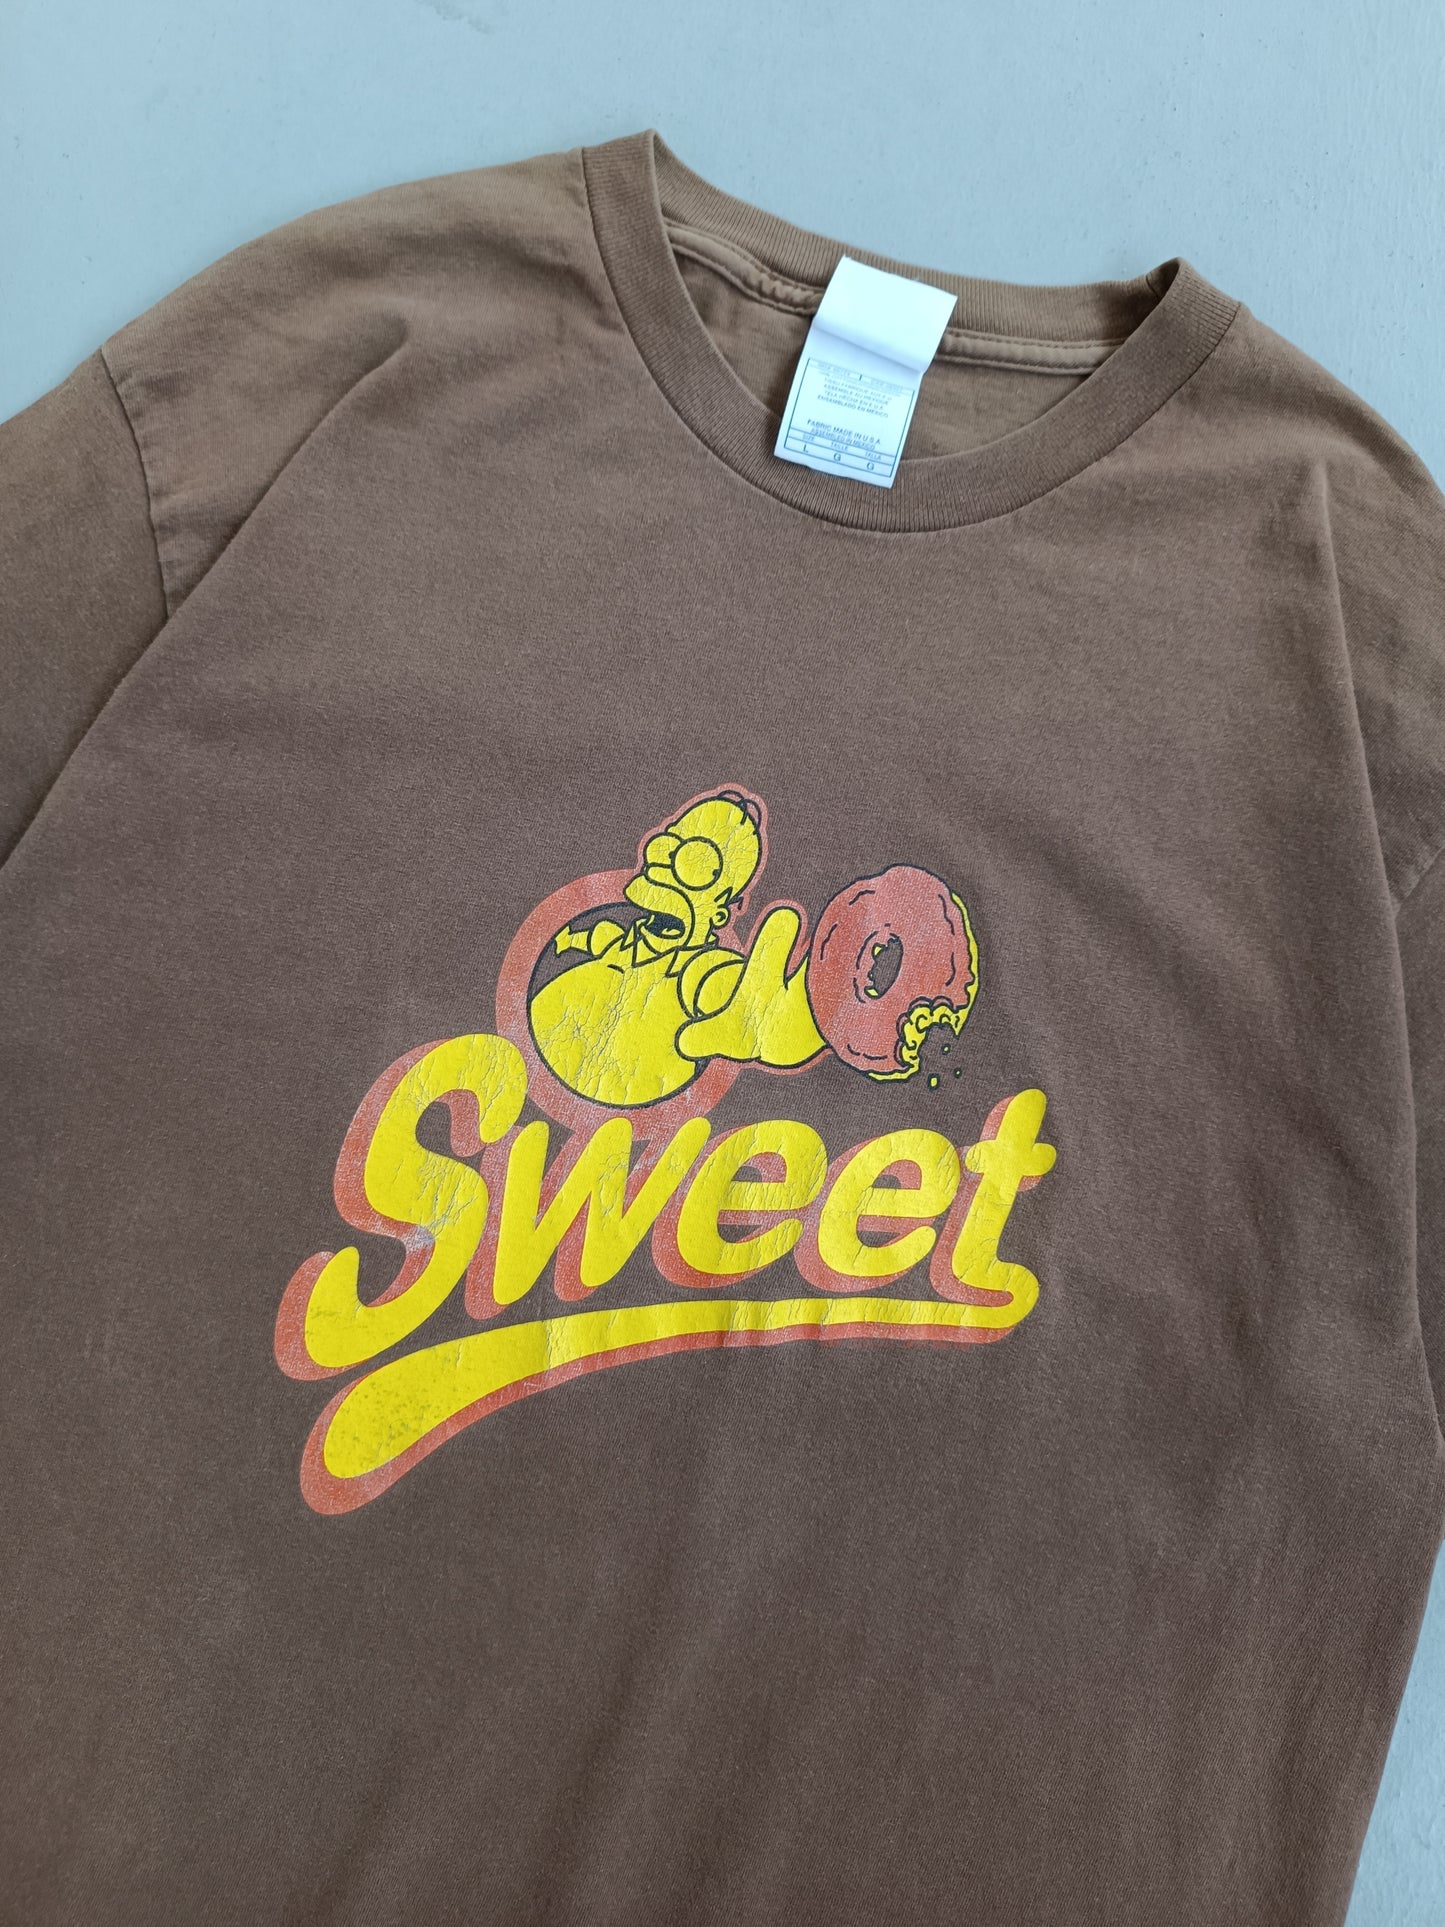 The Simpsons Sweet - L